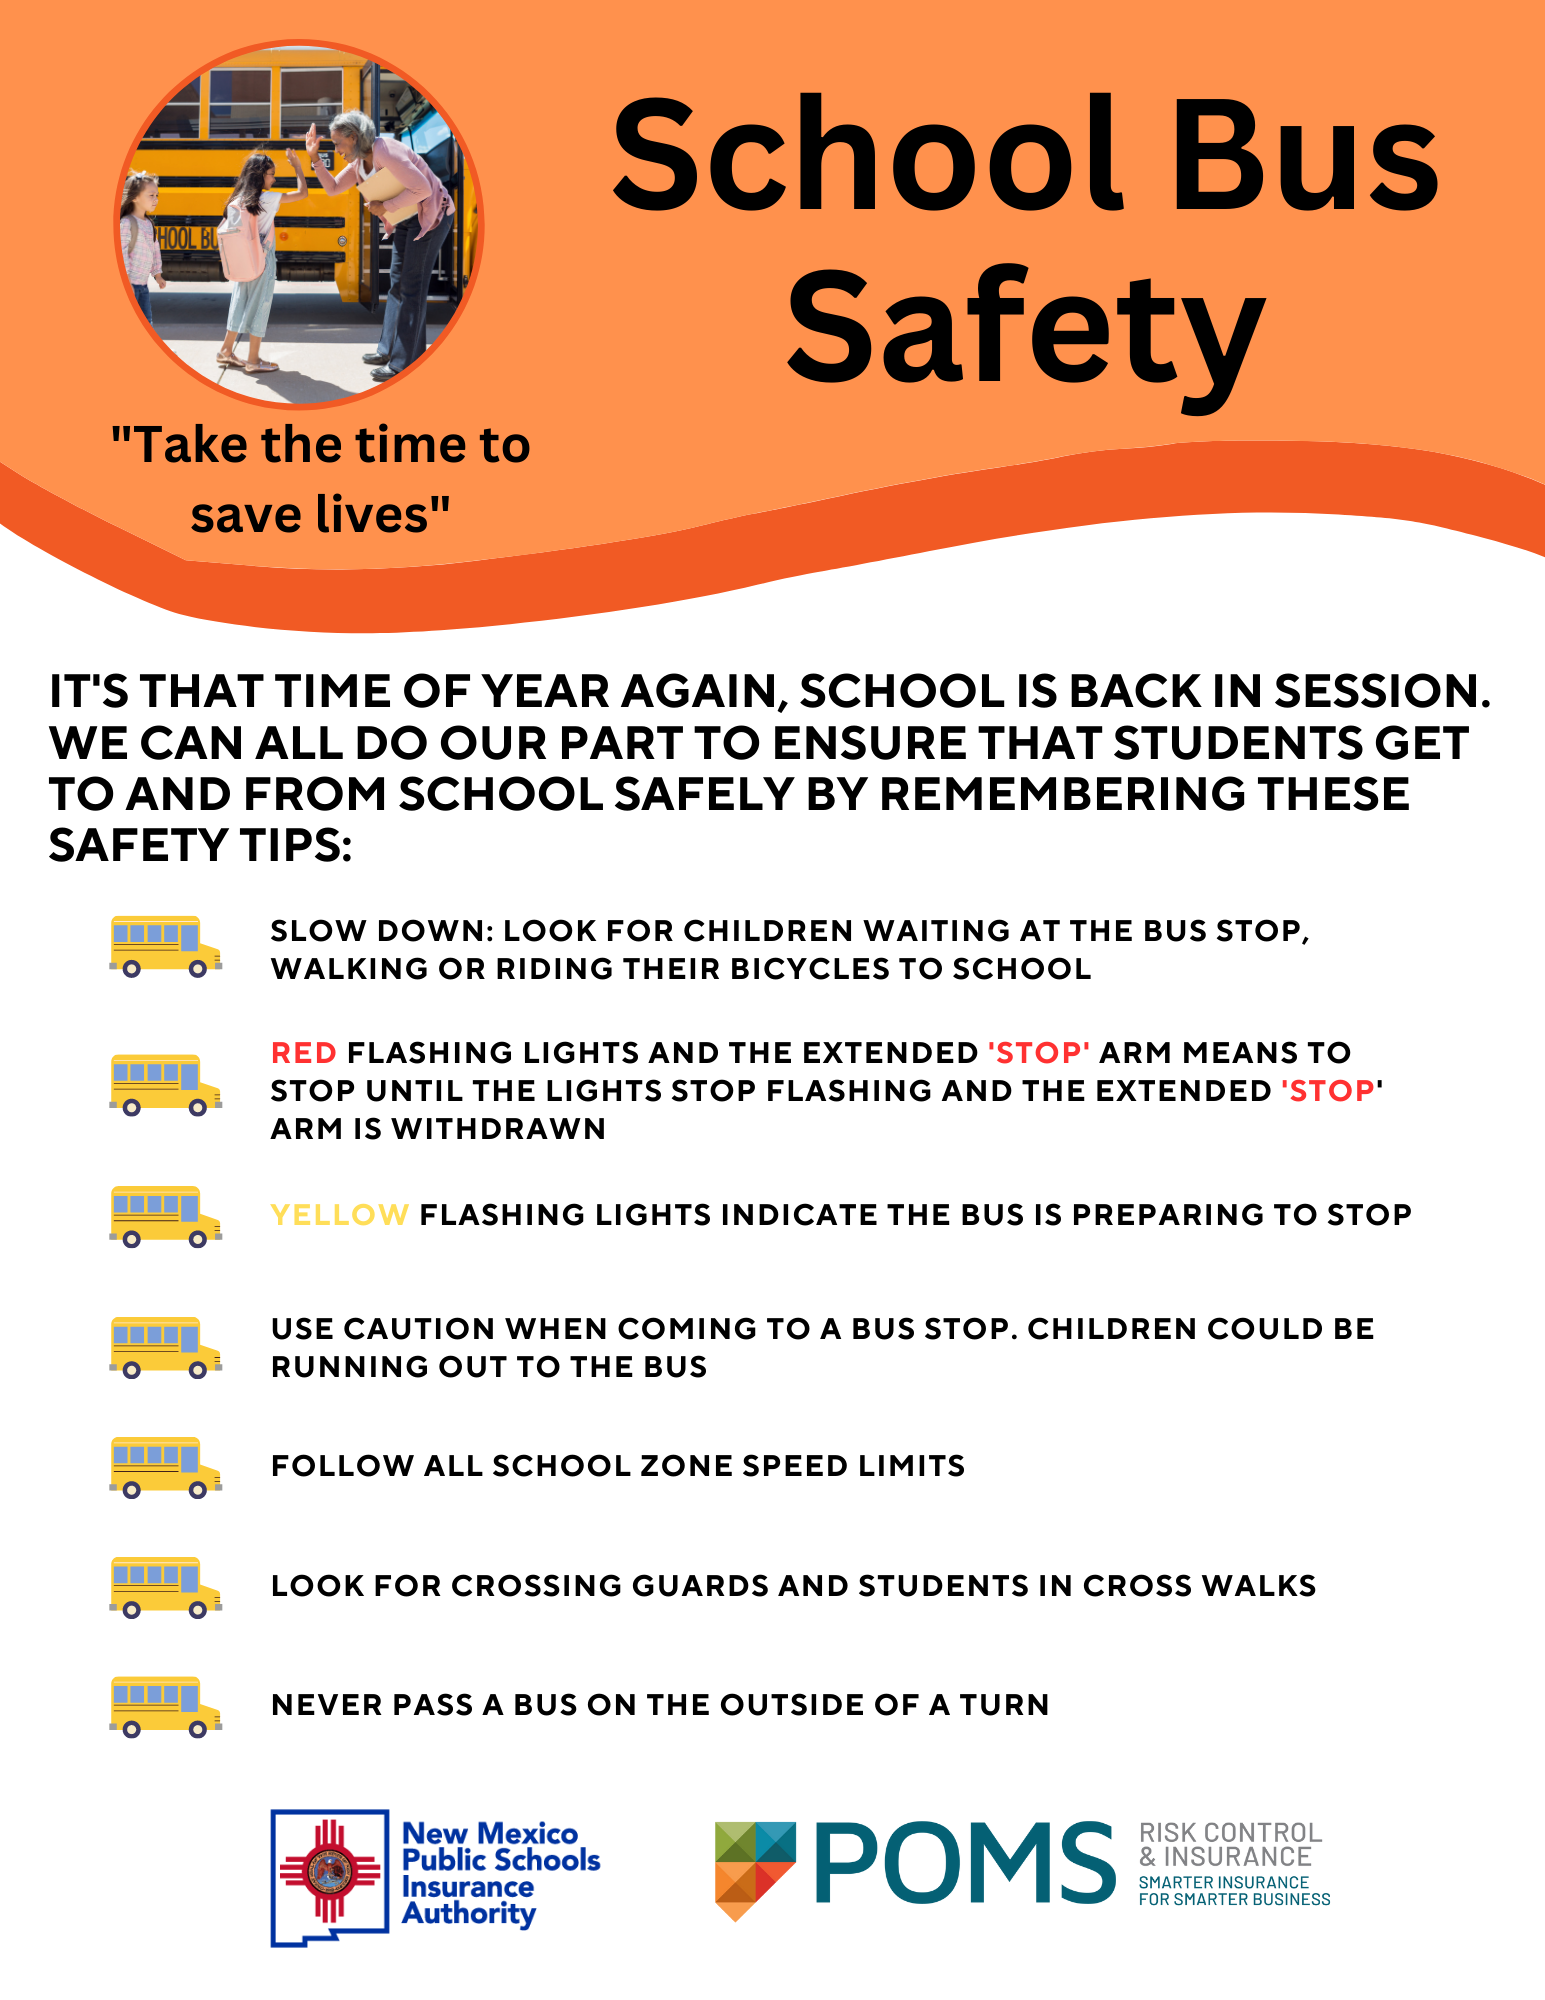 Bus Safety Campaign Infographic